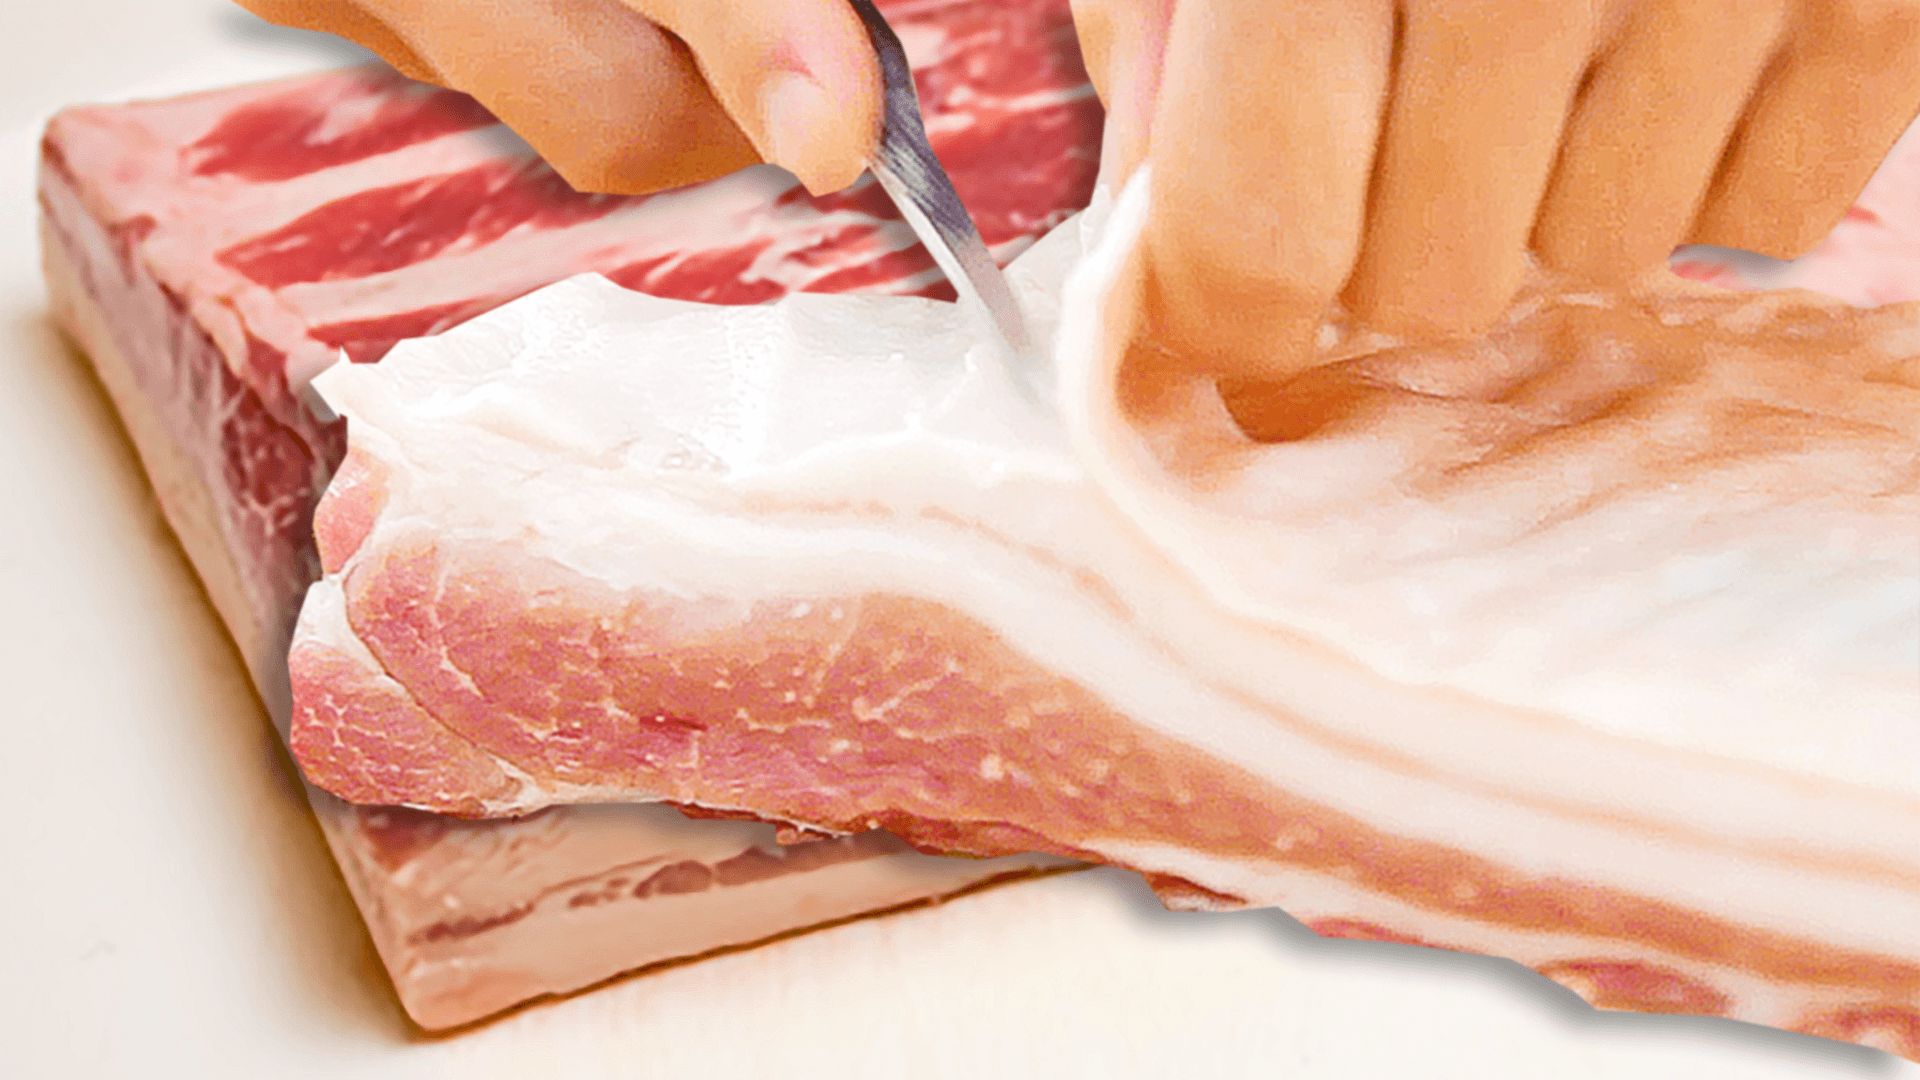 How to Cut the Skin from Pork Belly